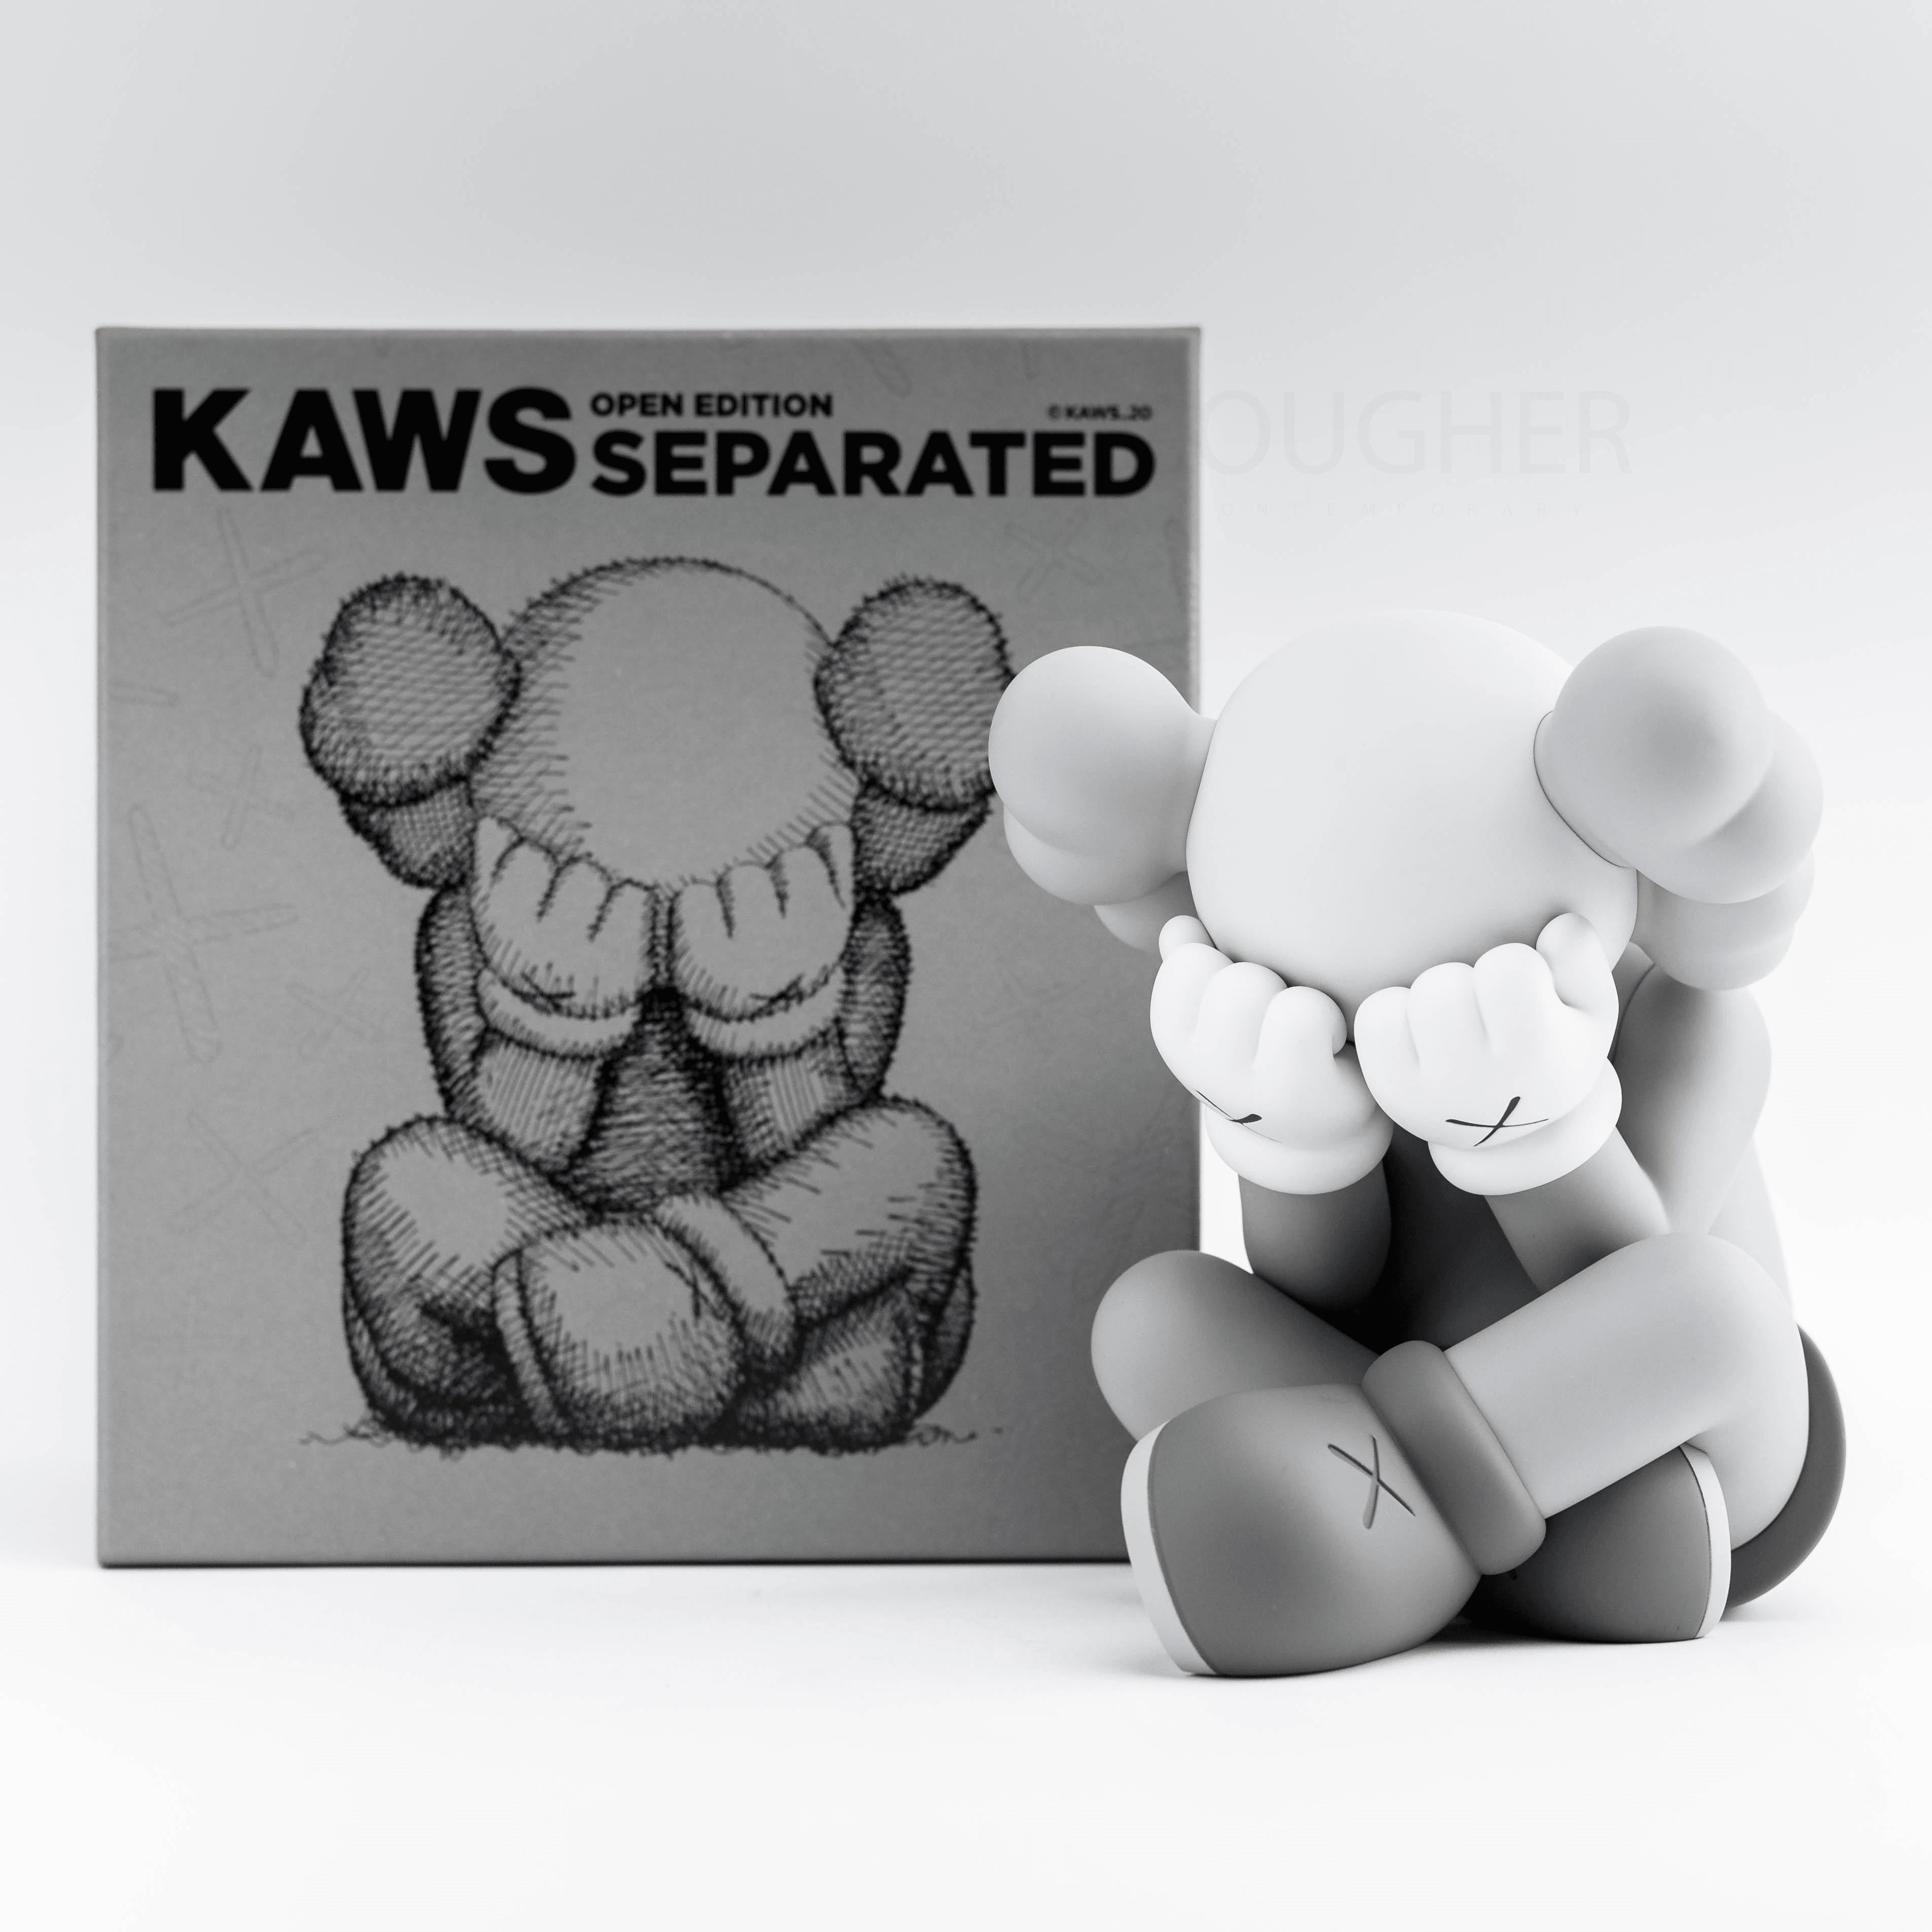 kaws open edition separated